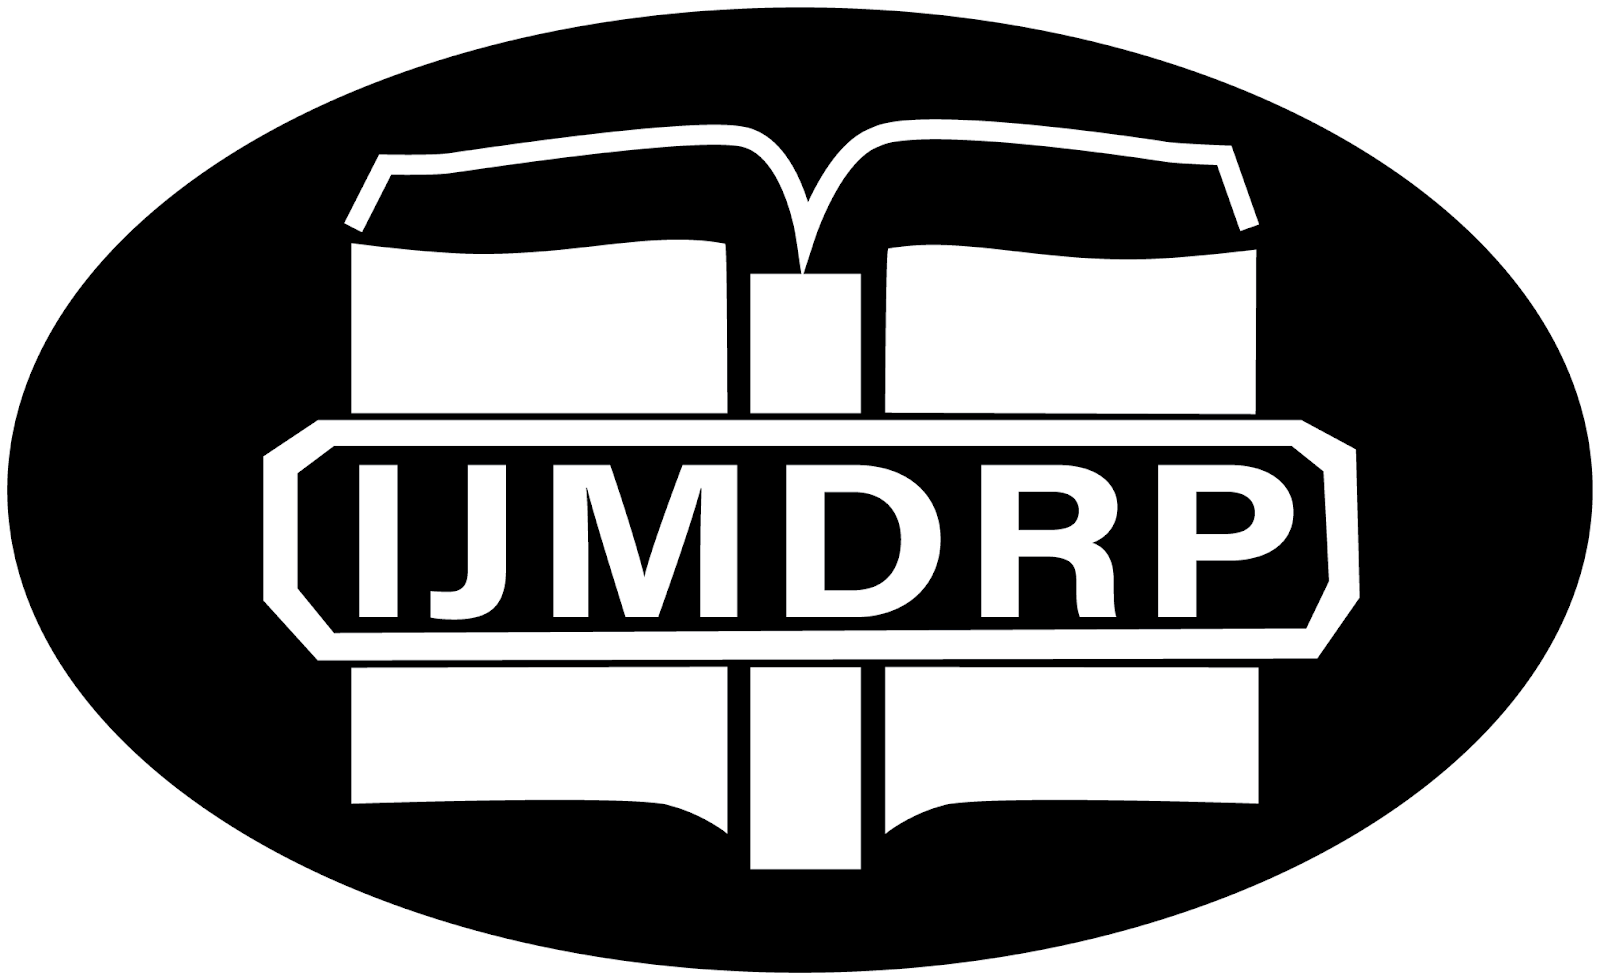 IJMDRP Journal - Publish Your Research Paper.